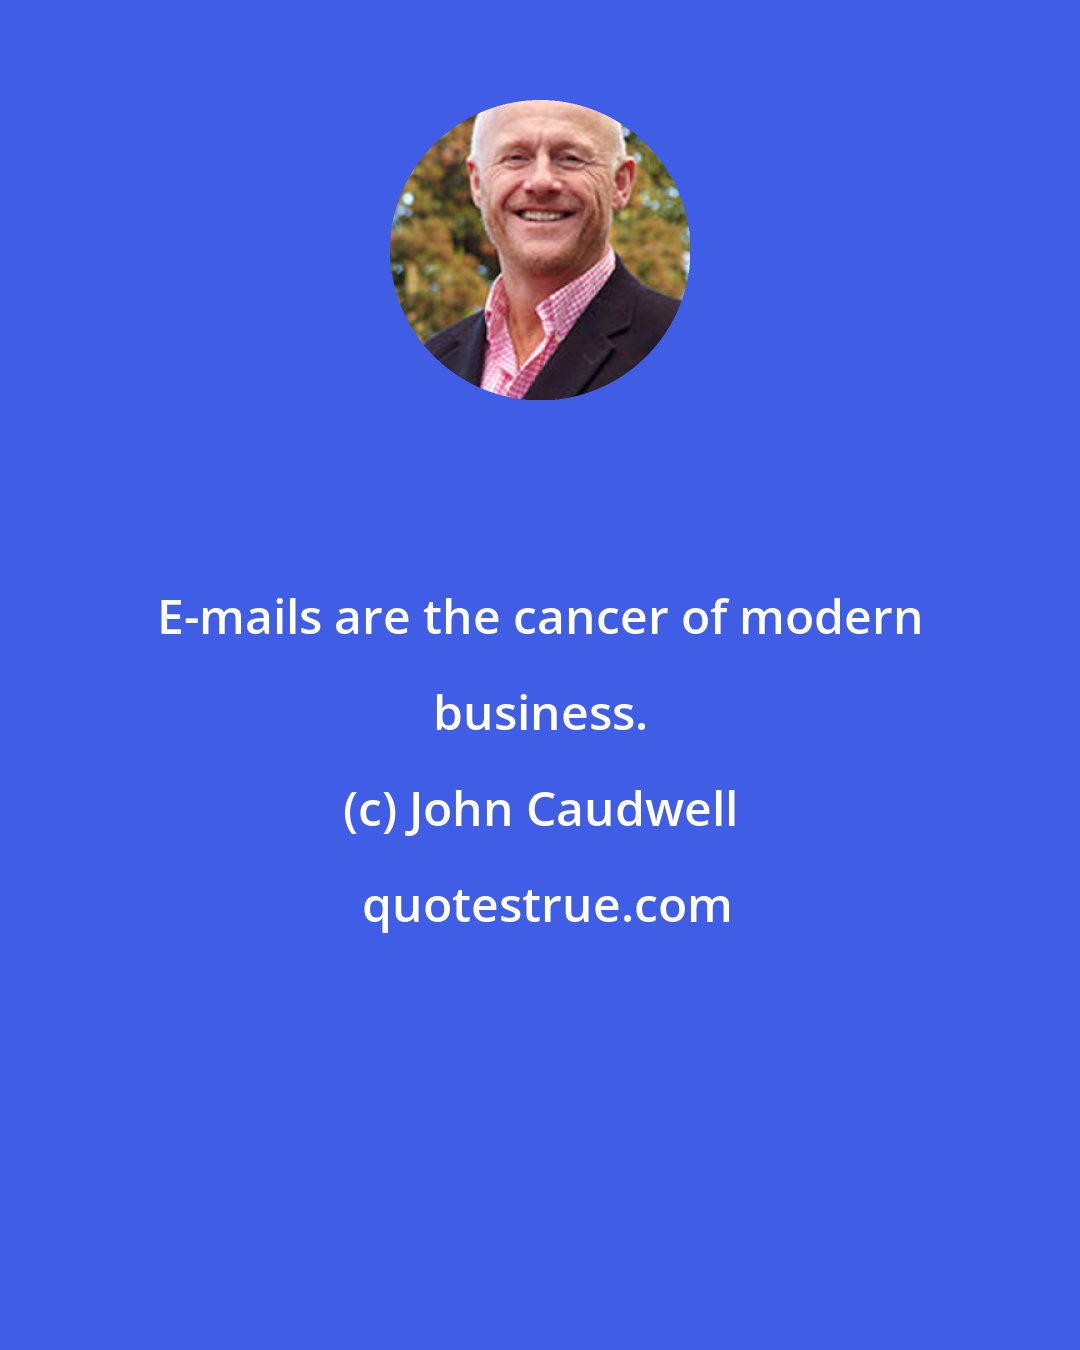 John Caudwell: E-mails are the cancer of modern business.